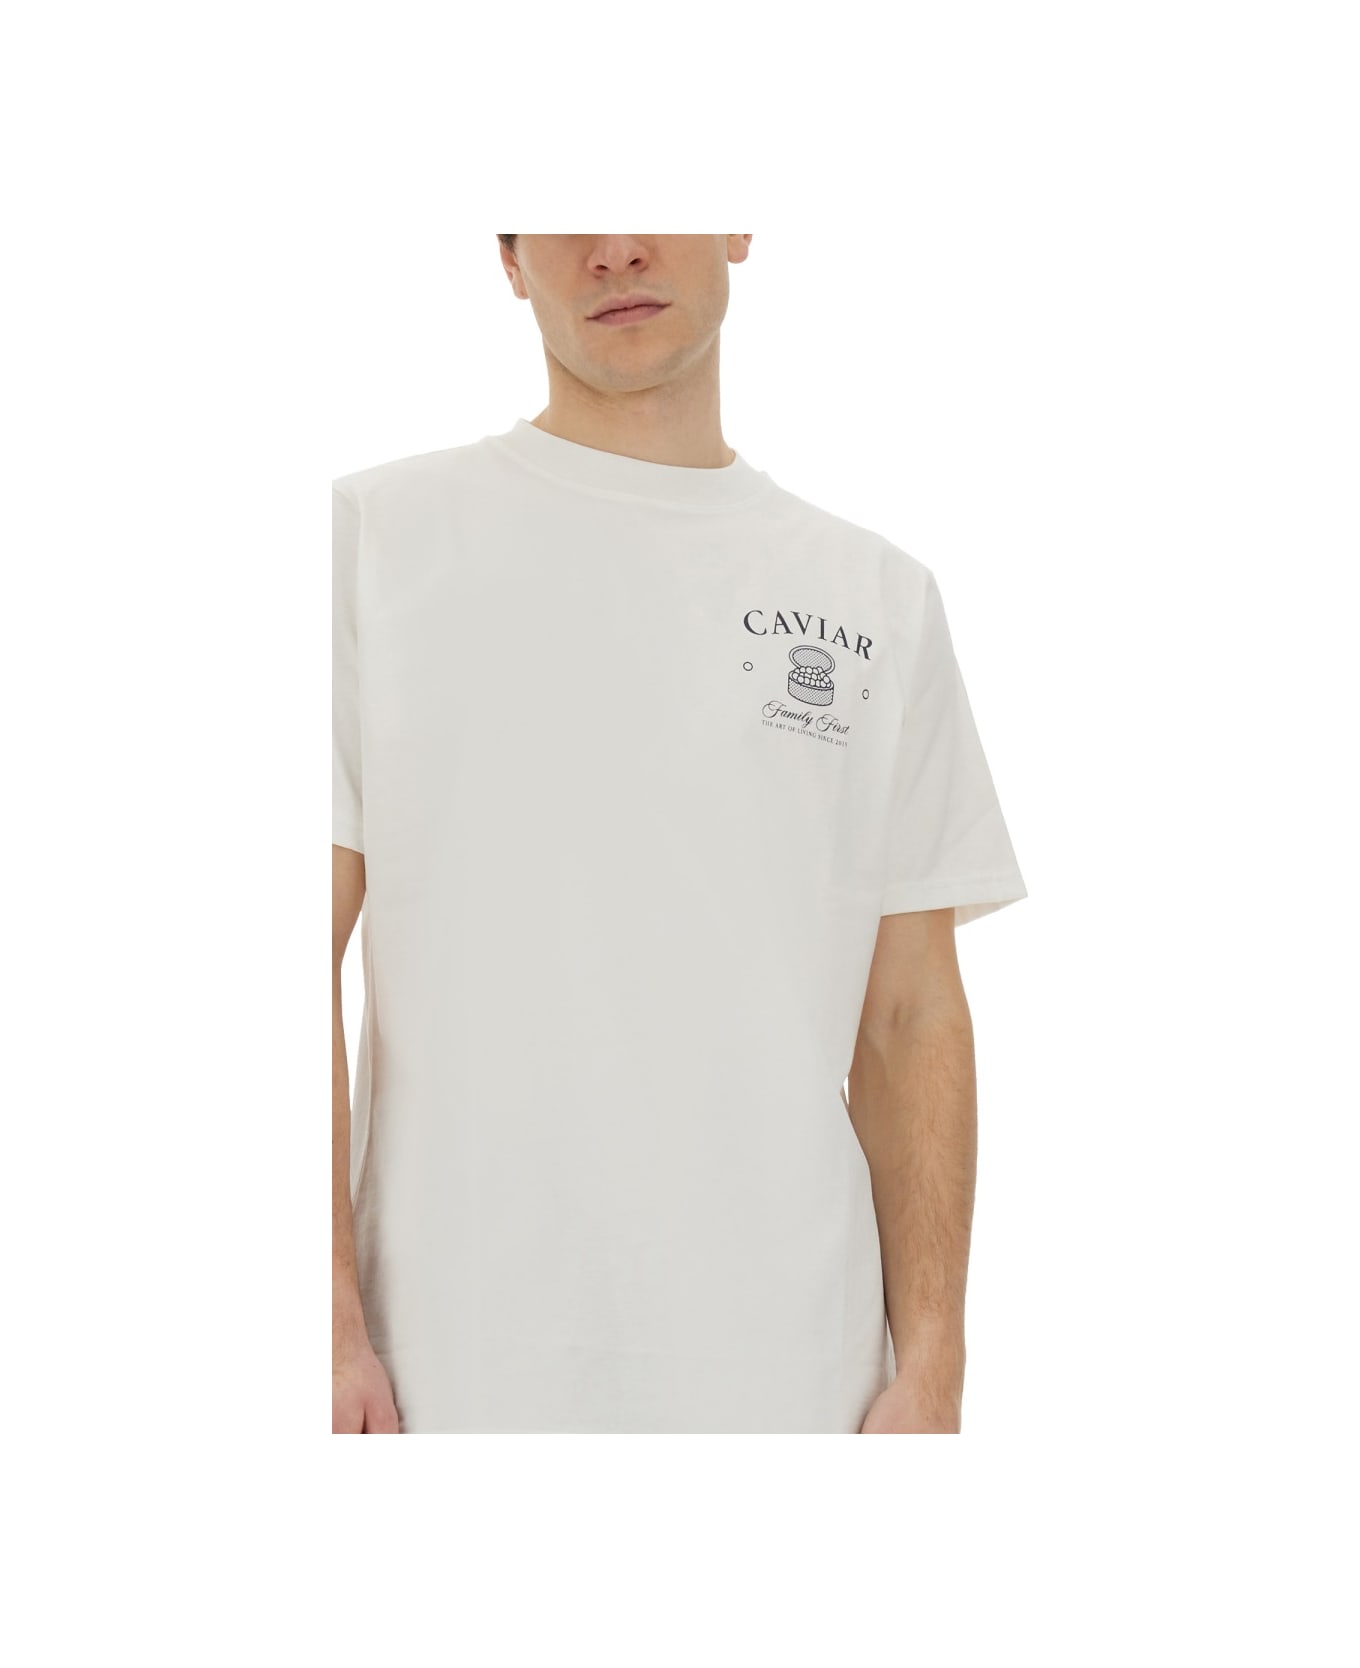 Family First Milano T-shirt With "caviar" Print - WHITE シャツ